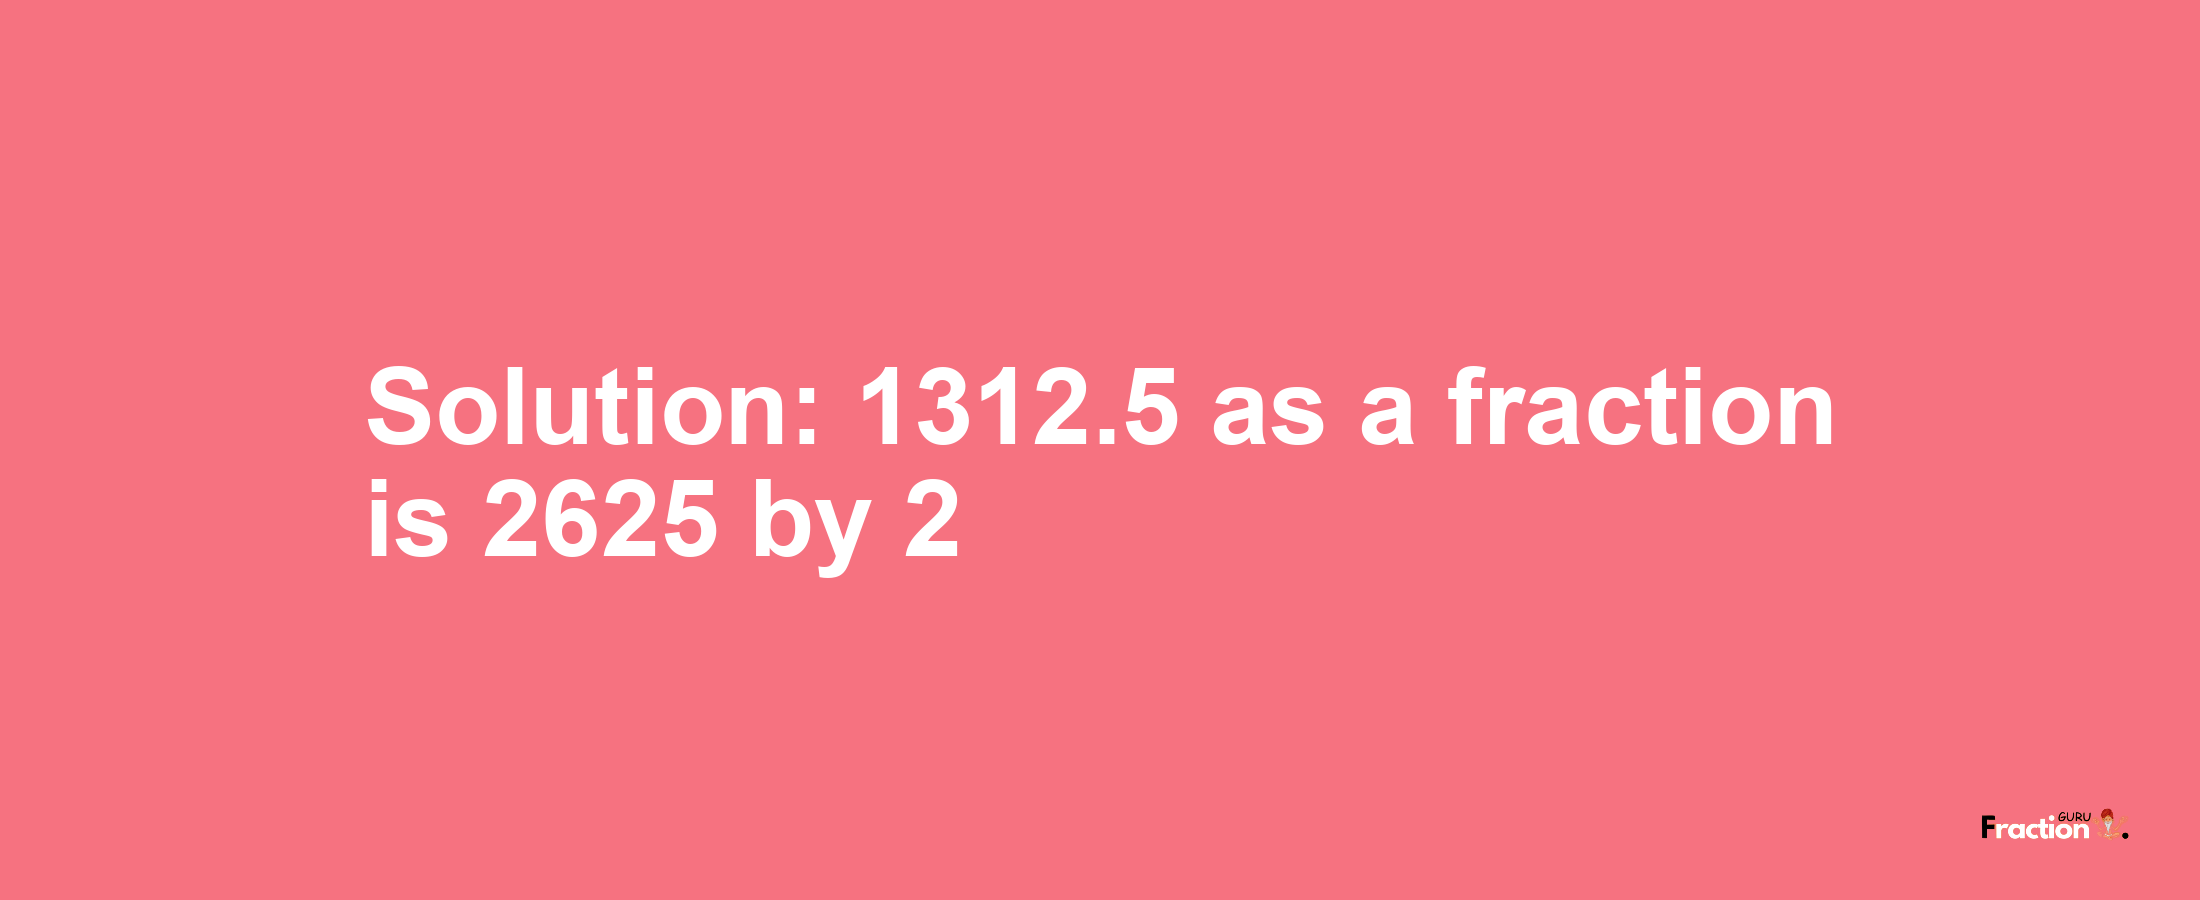 Solution:1312.5 as a fraction is 2625/2